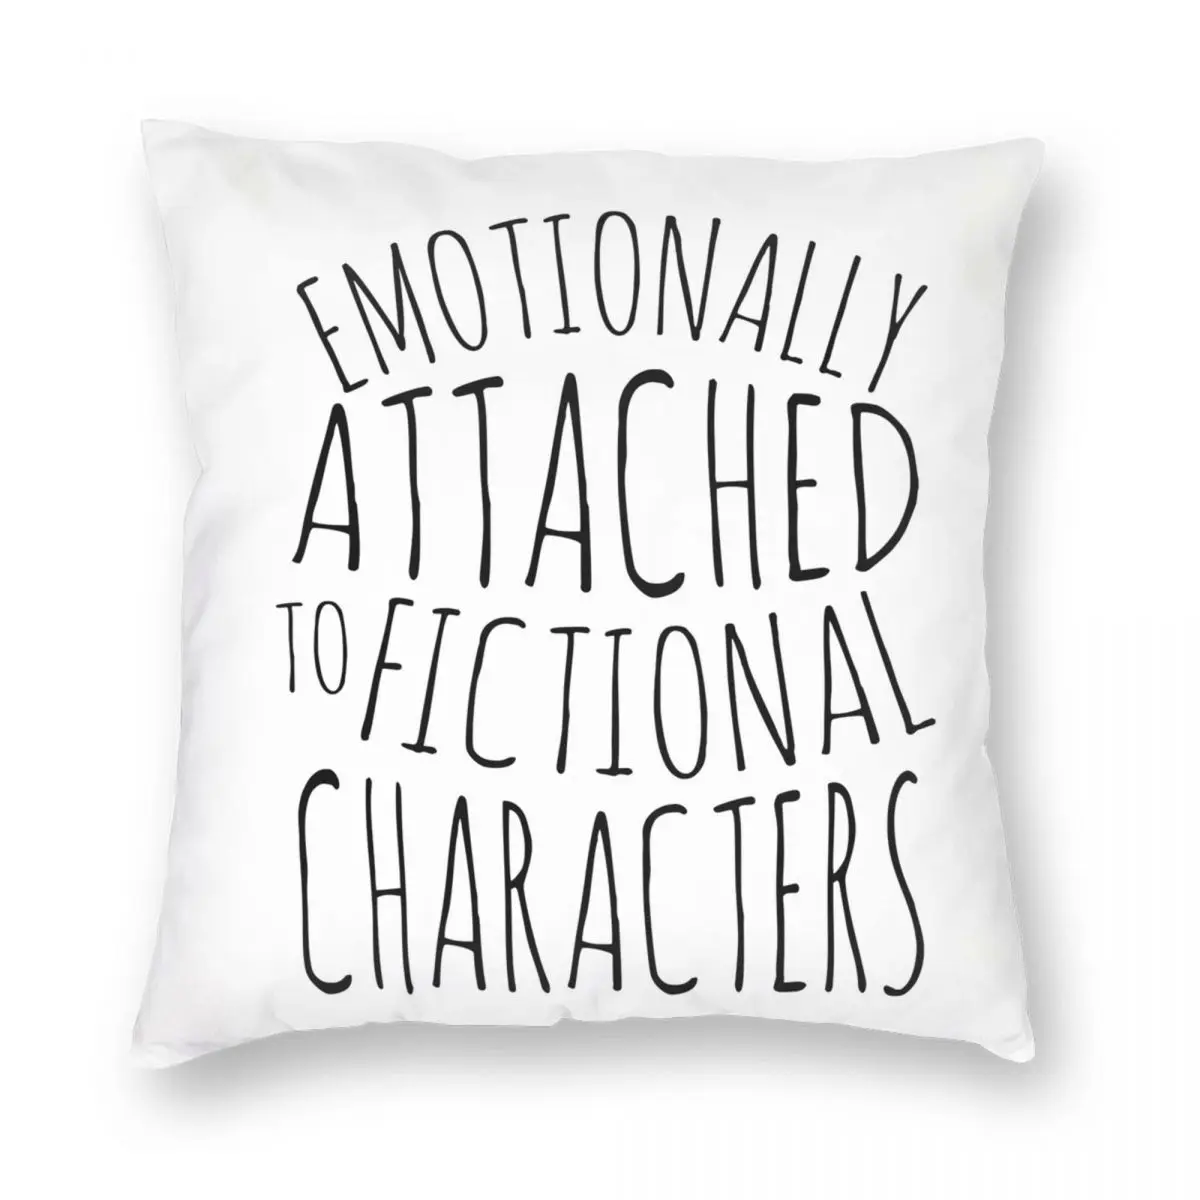 

Emotionally Attached To Fictional Characters Square Pillowcase Polyester Linen Velvet Zip Decor Pillow Case Room Cushion Cover